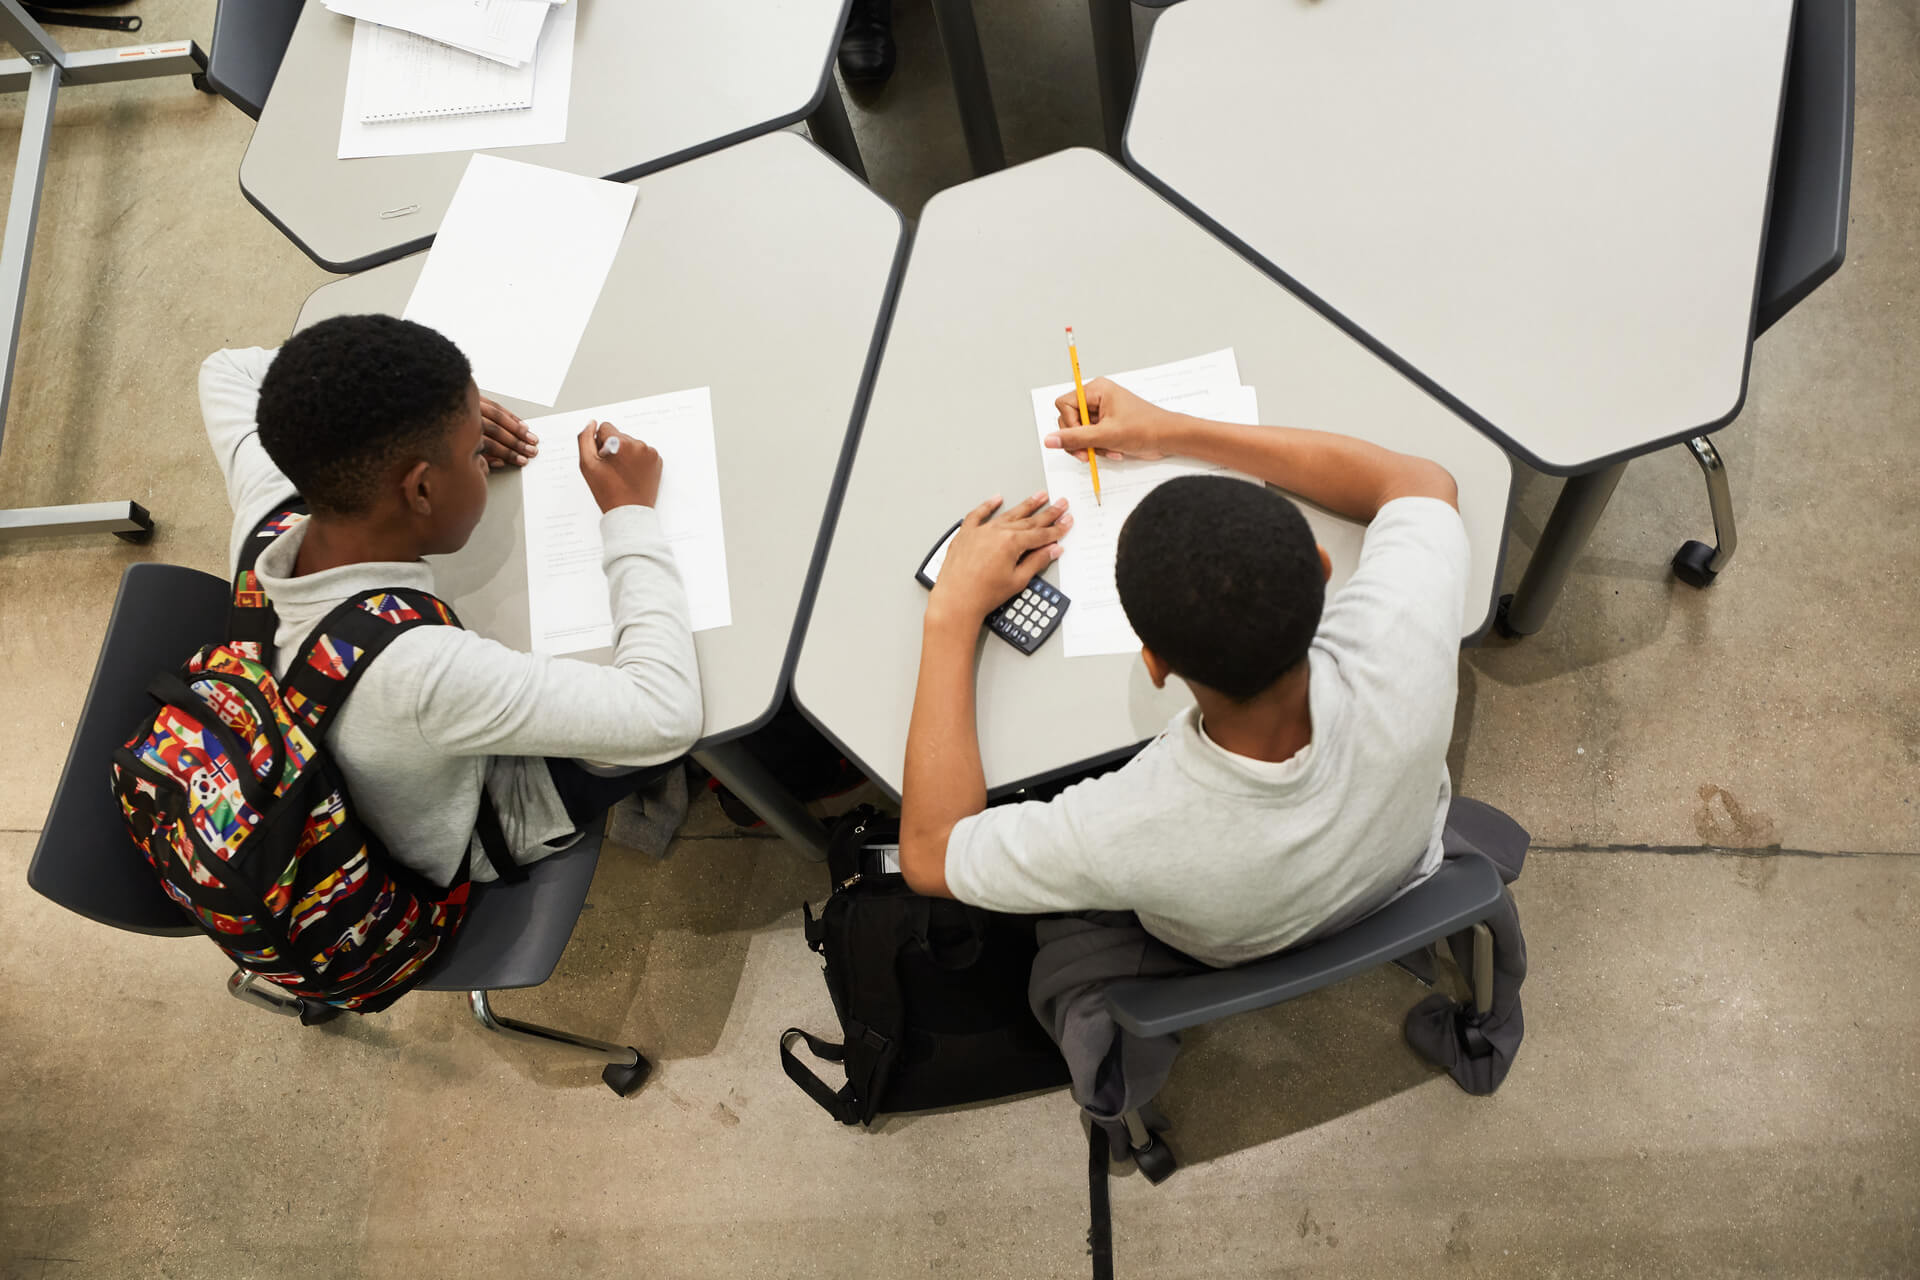 Bird's-eye view of two male students sitting at desks next to each other and writing on pieces of paper